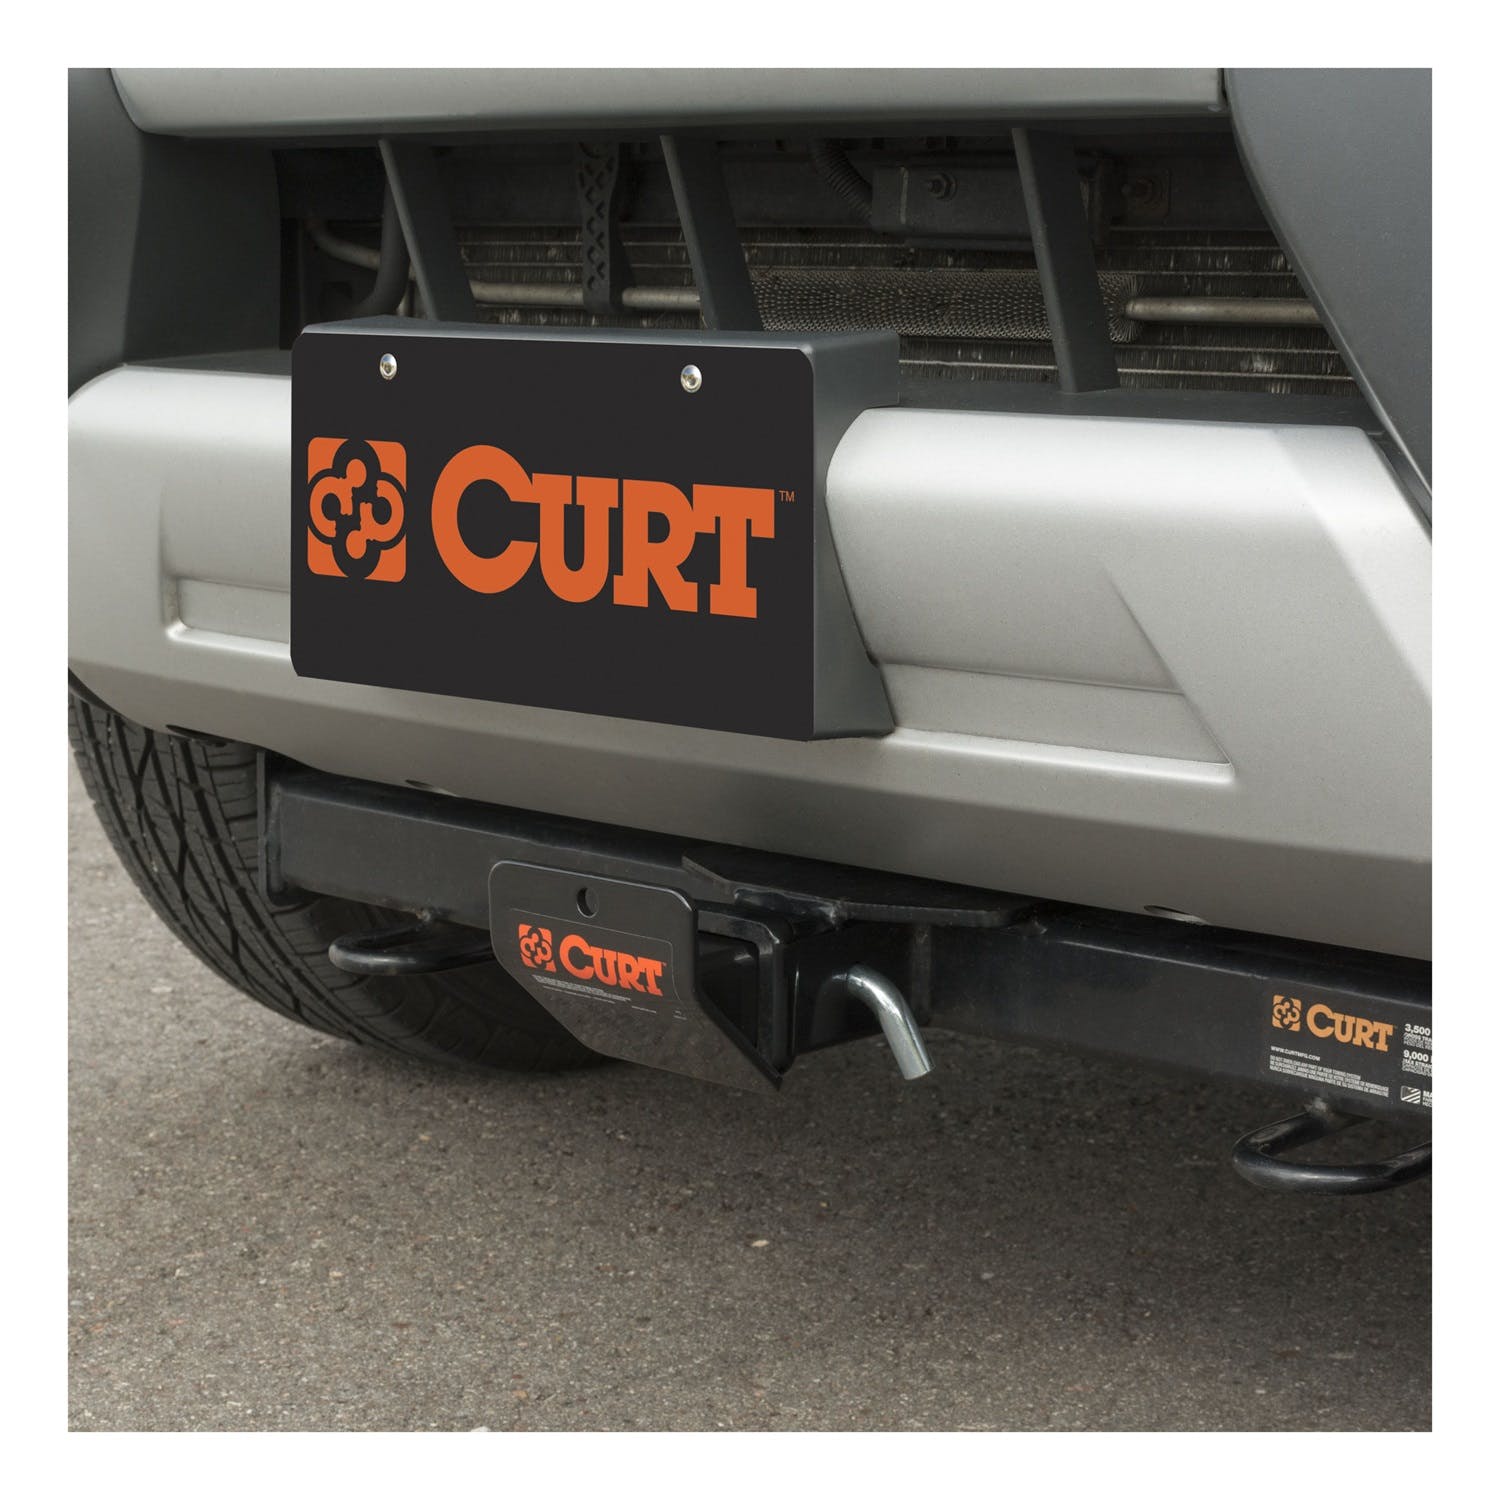 CURT 31007 Hitch-Mounted Skid Shield (Fits 2 Receiver)